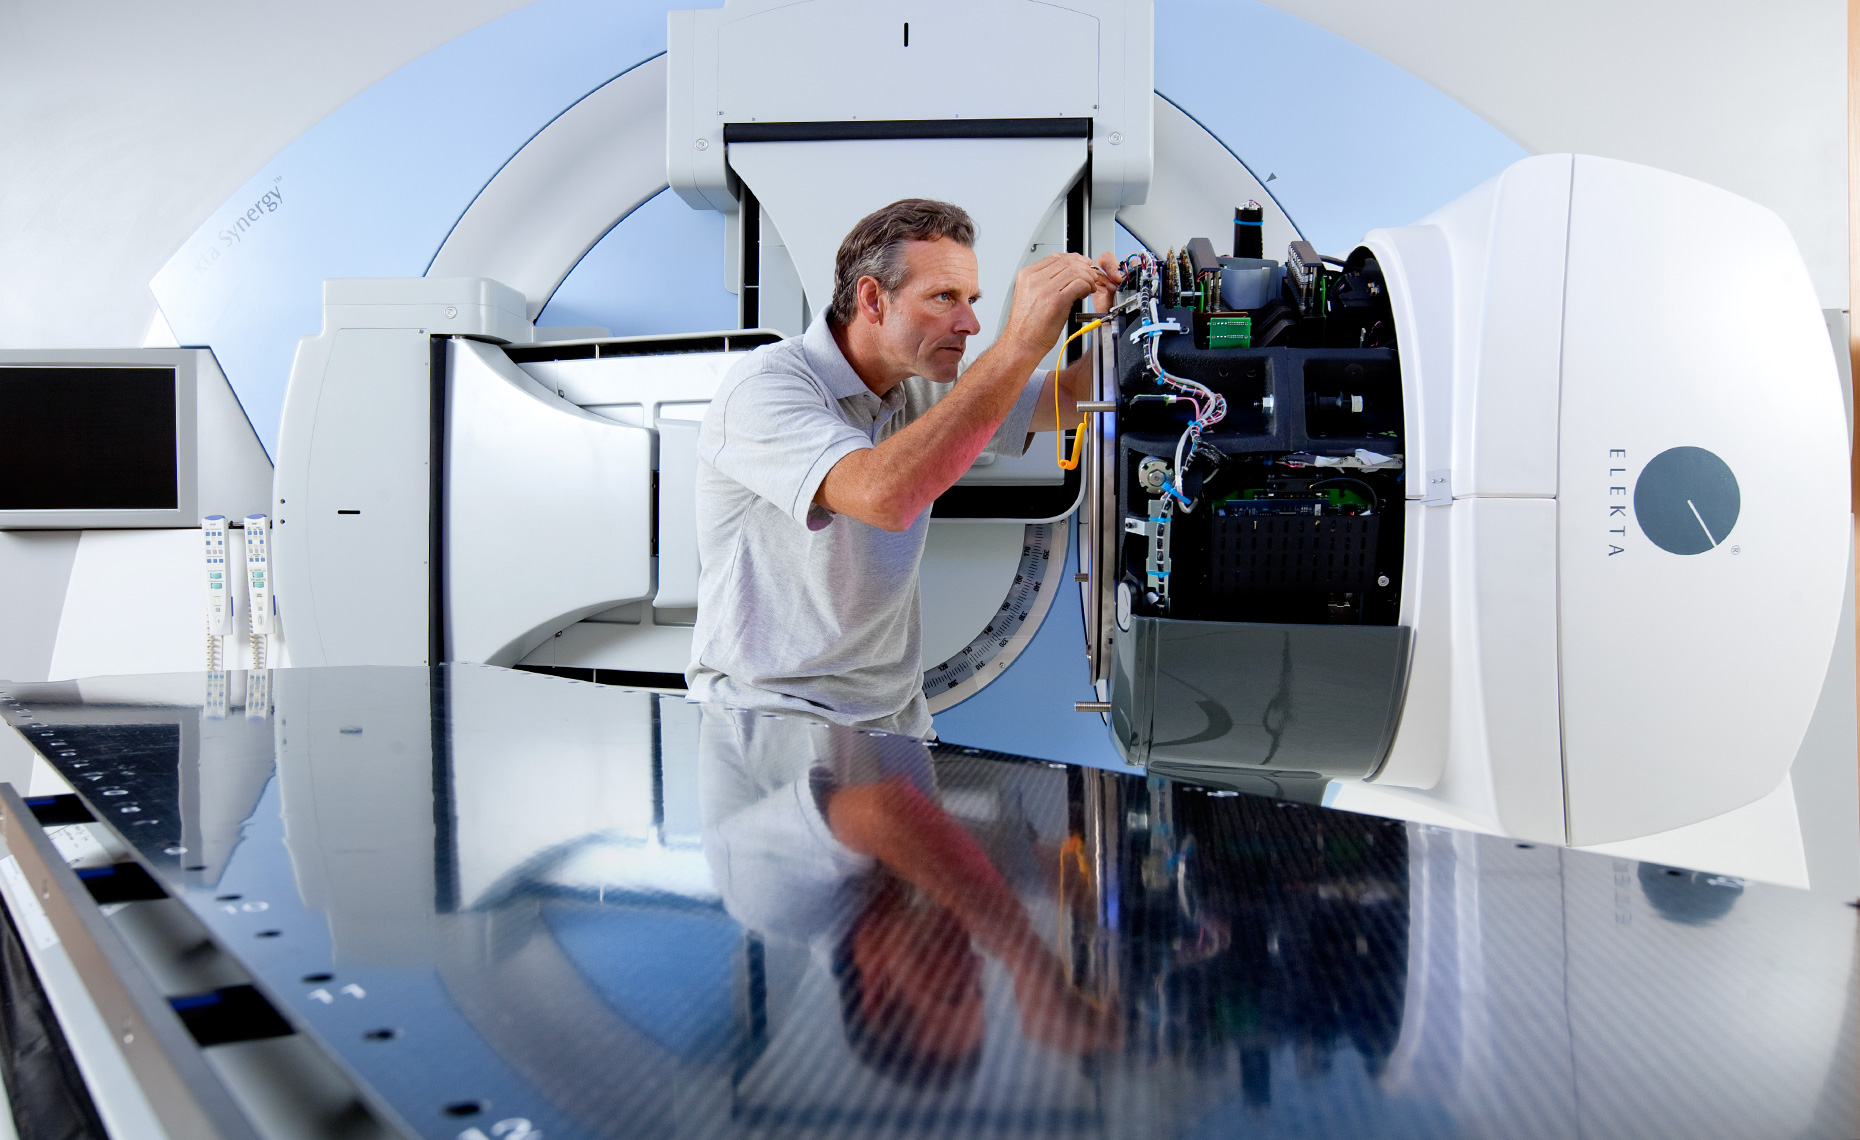 Editorial commercial photography of engineer working on radiotherapy machine in a hospital.